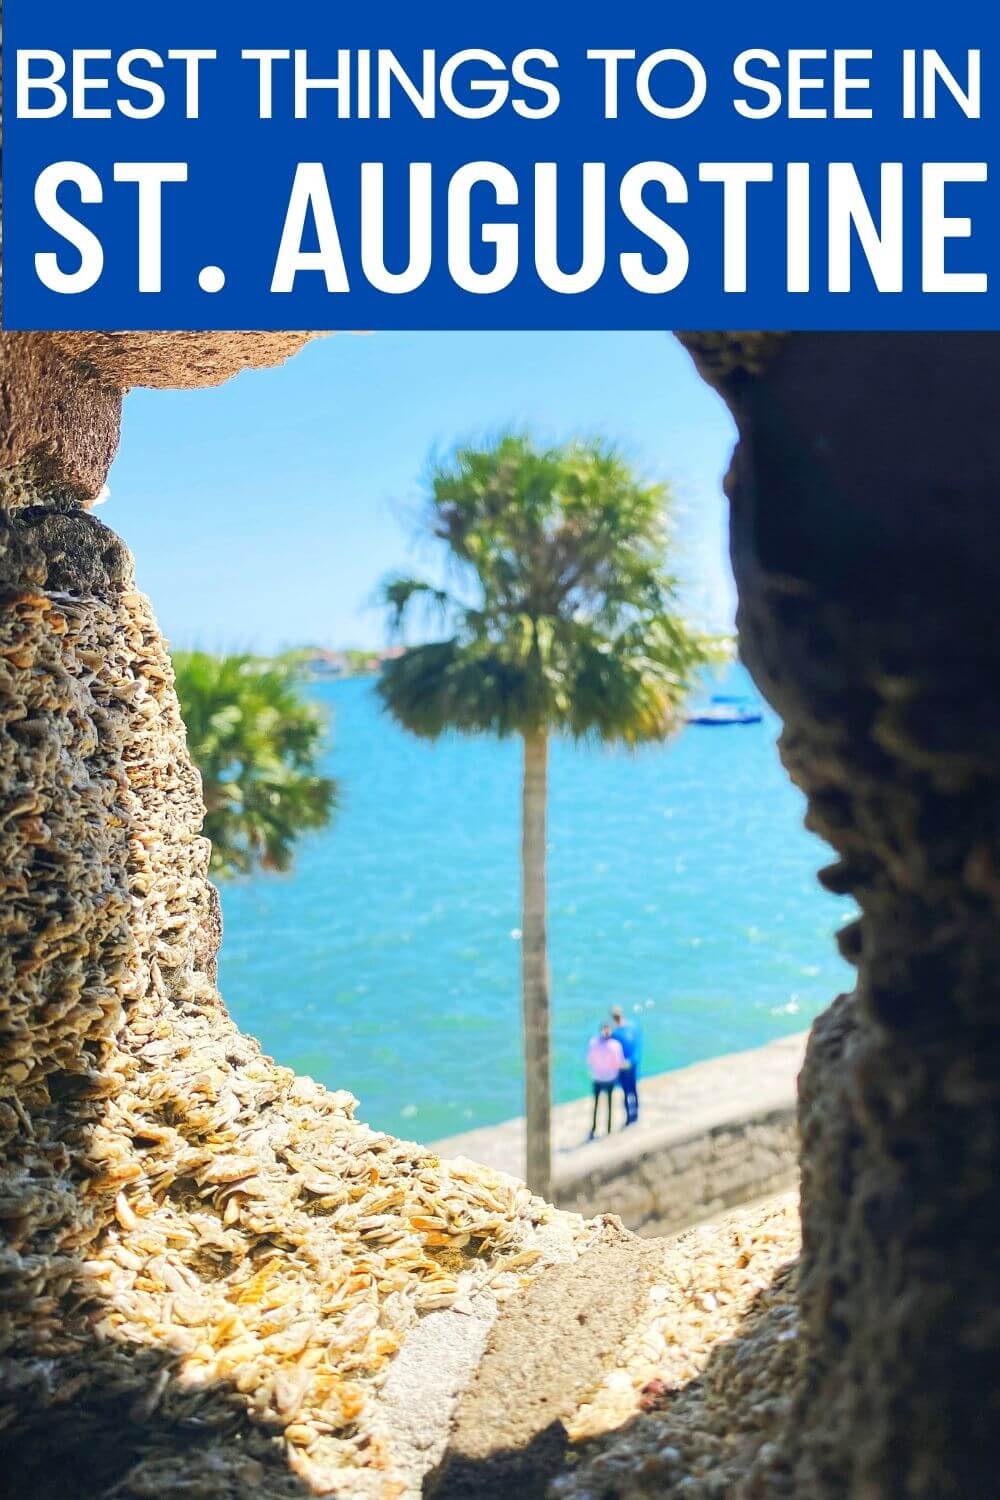 The Best Things to See in St. Augustine FL